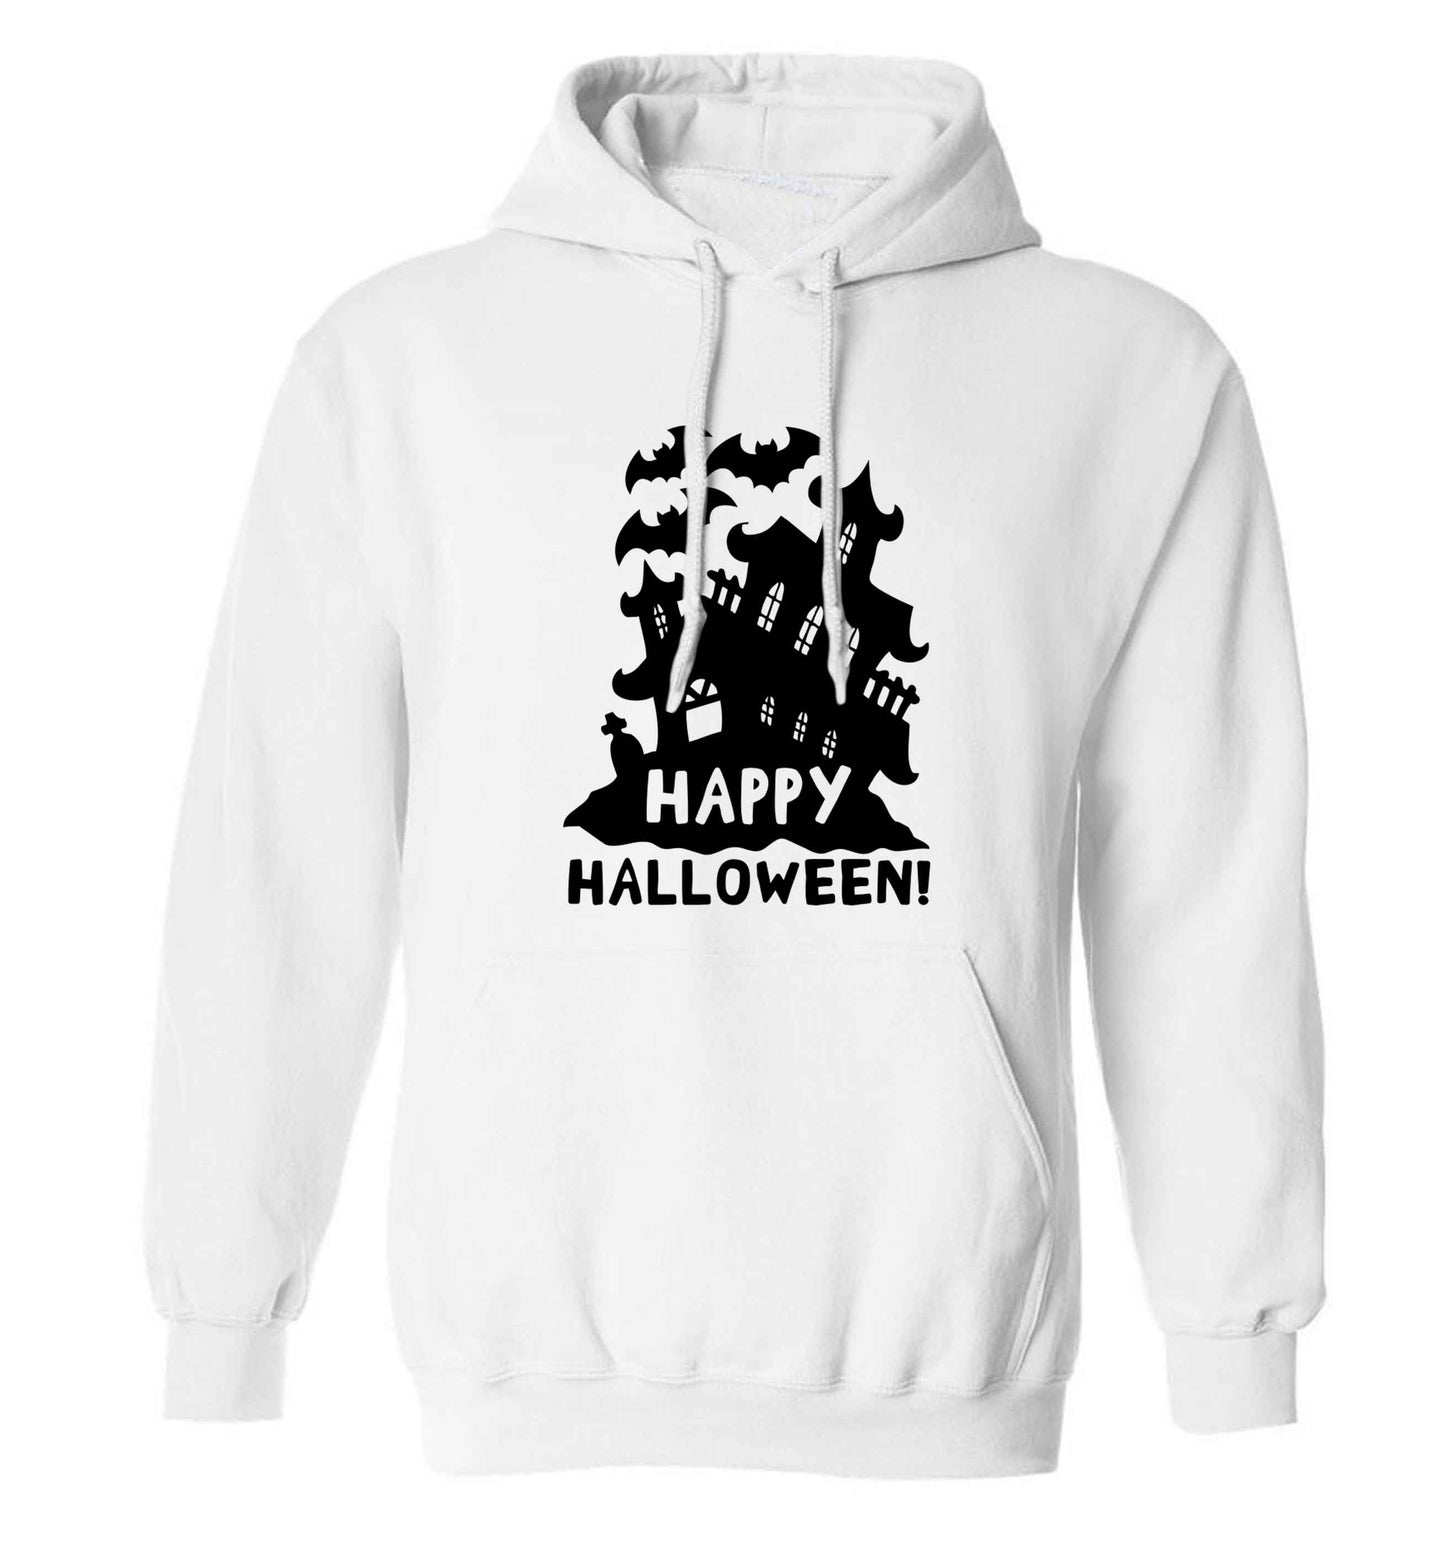 Happy halloween - haunted house adults unisex white hoodie 2XL